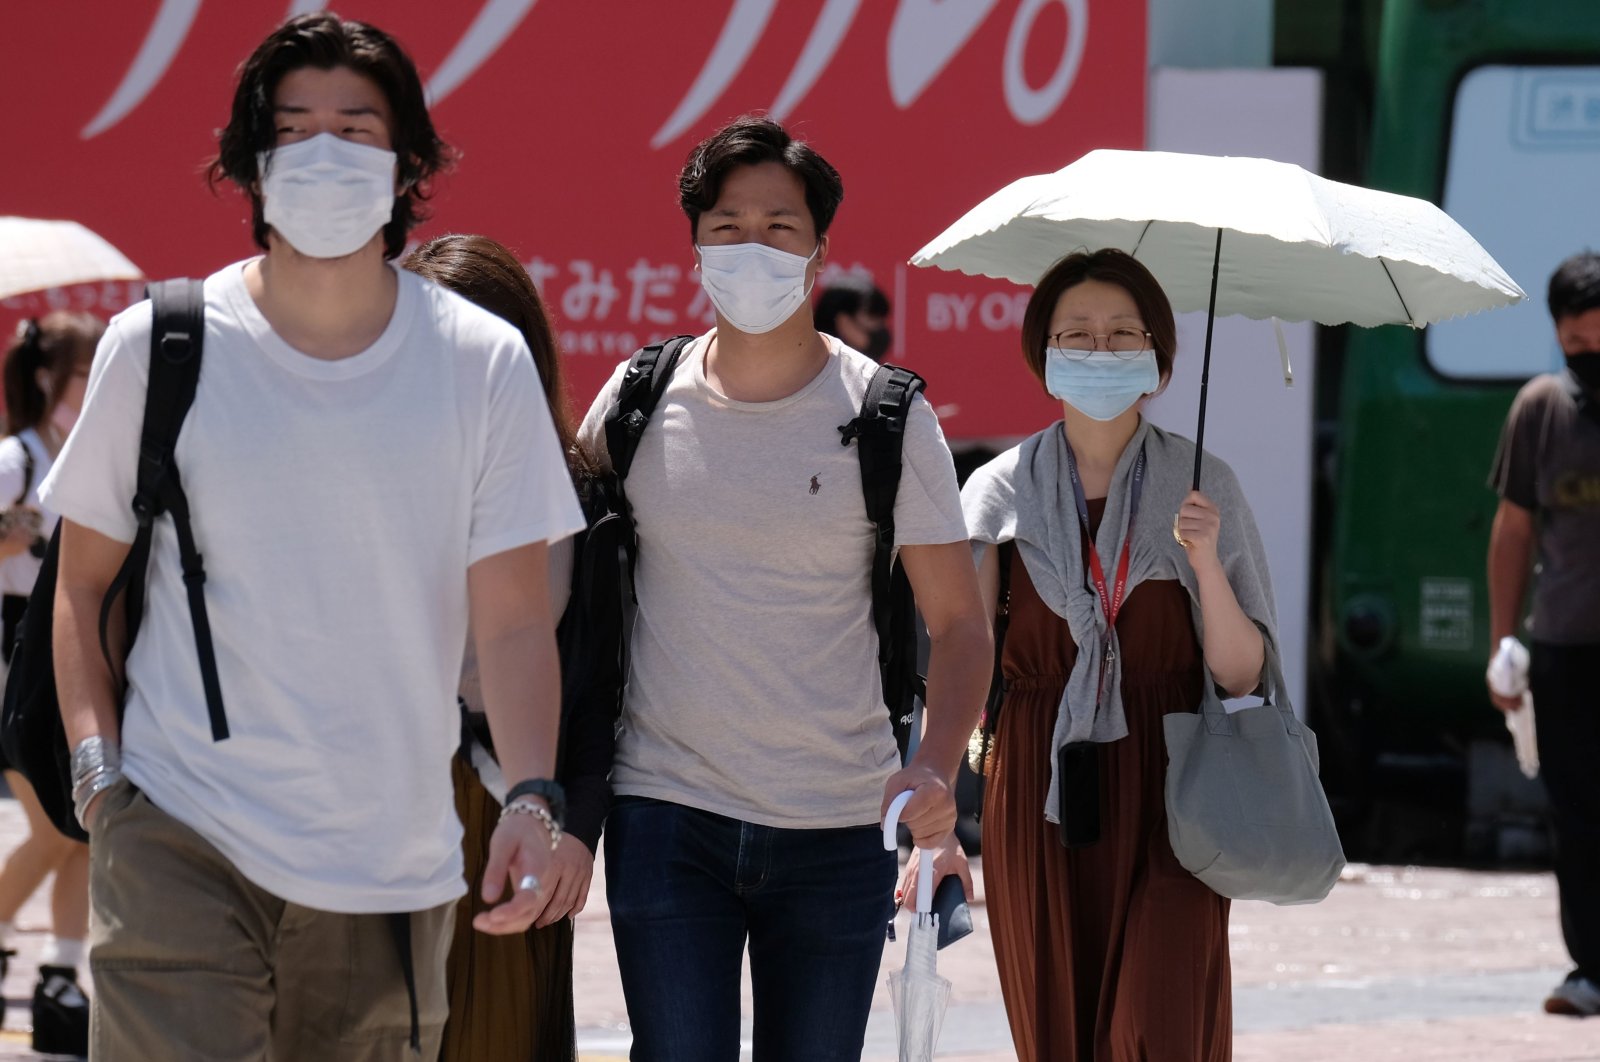 People wearing face masks walk across Shibuya Crossing in the Shibuya shopping and entertainment district in Tokyo, Japan, July 26, 2020. (AFP Photo)